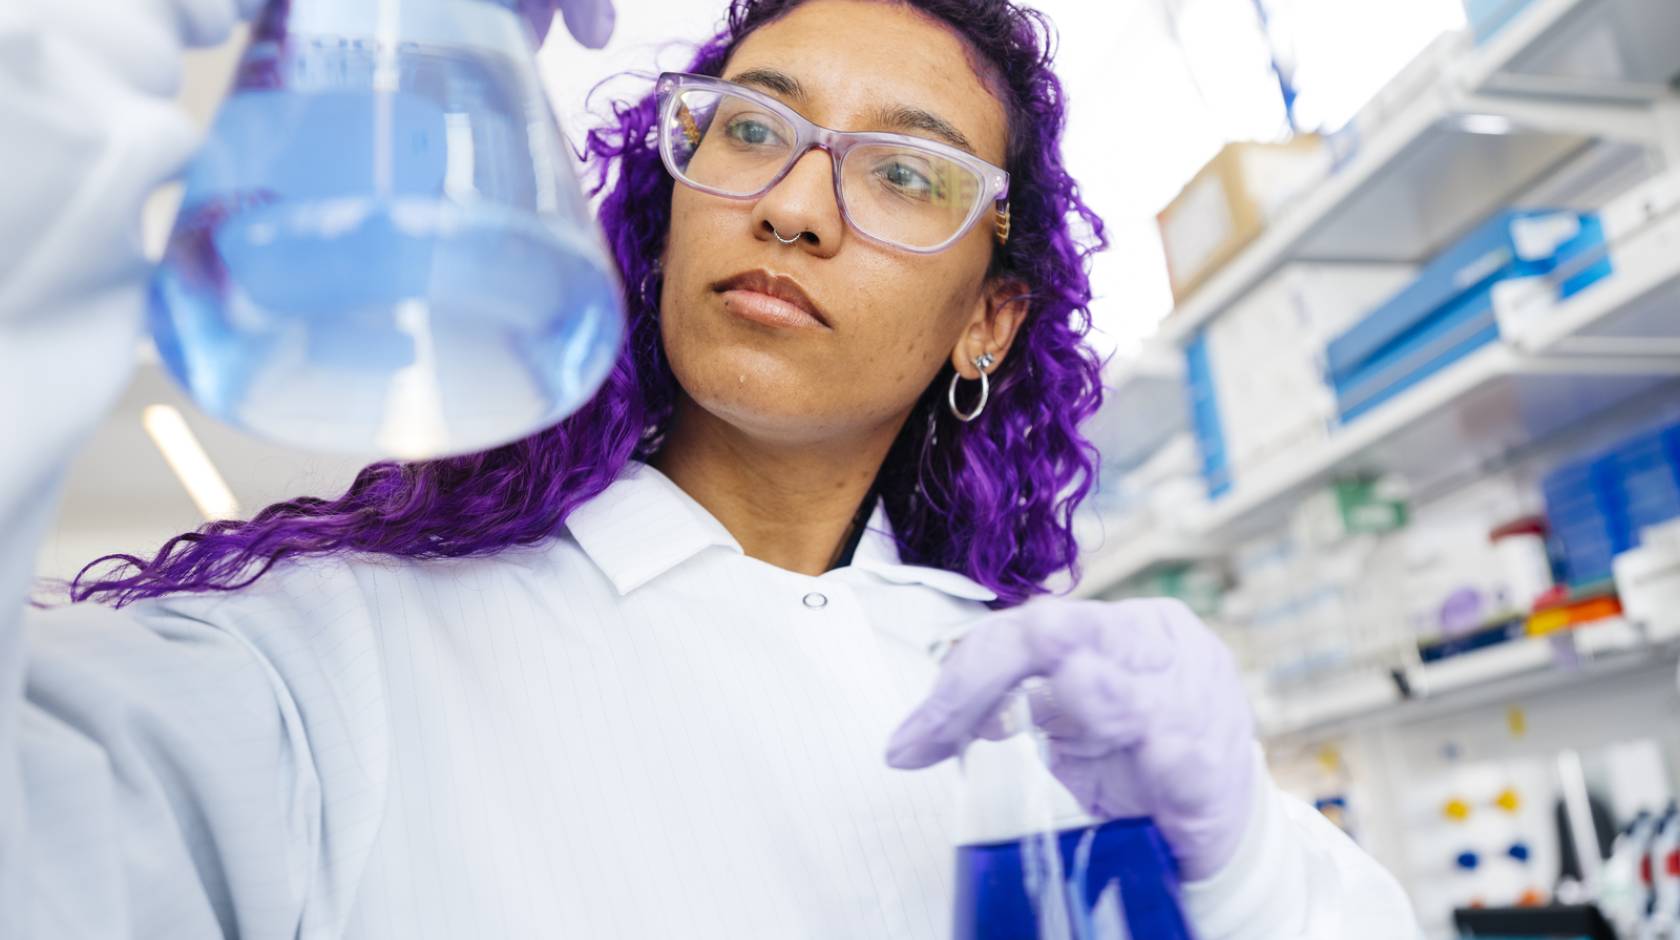 Woman with long, dyed-purple hair wearing a white lab coat and protective gear compares two flasks full of colorful liquid in a lab